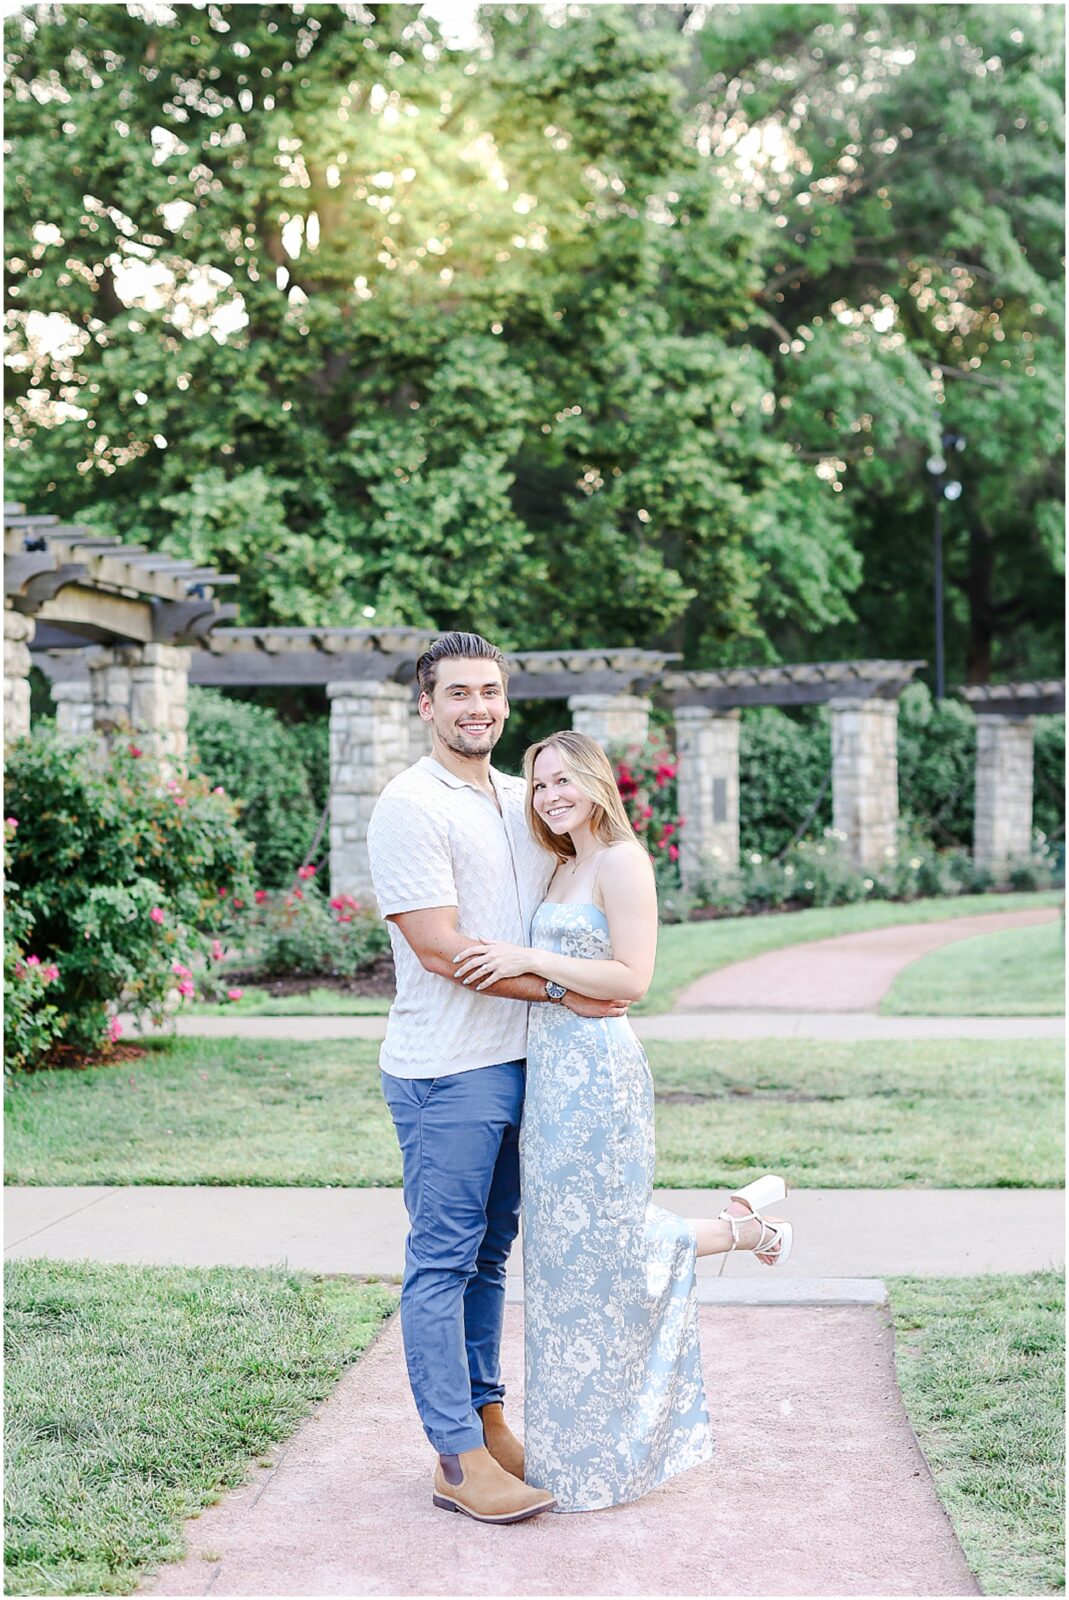 Stunning Romantic Engagement Photos in Kansas City with Light & Airy Vibrant Colors at a Rose Garden in Loose Park and the Nelson Atkins Museum | Isabelle & Collyn | KC Wedding and Engagement Photographer Mariam Saifan Photography